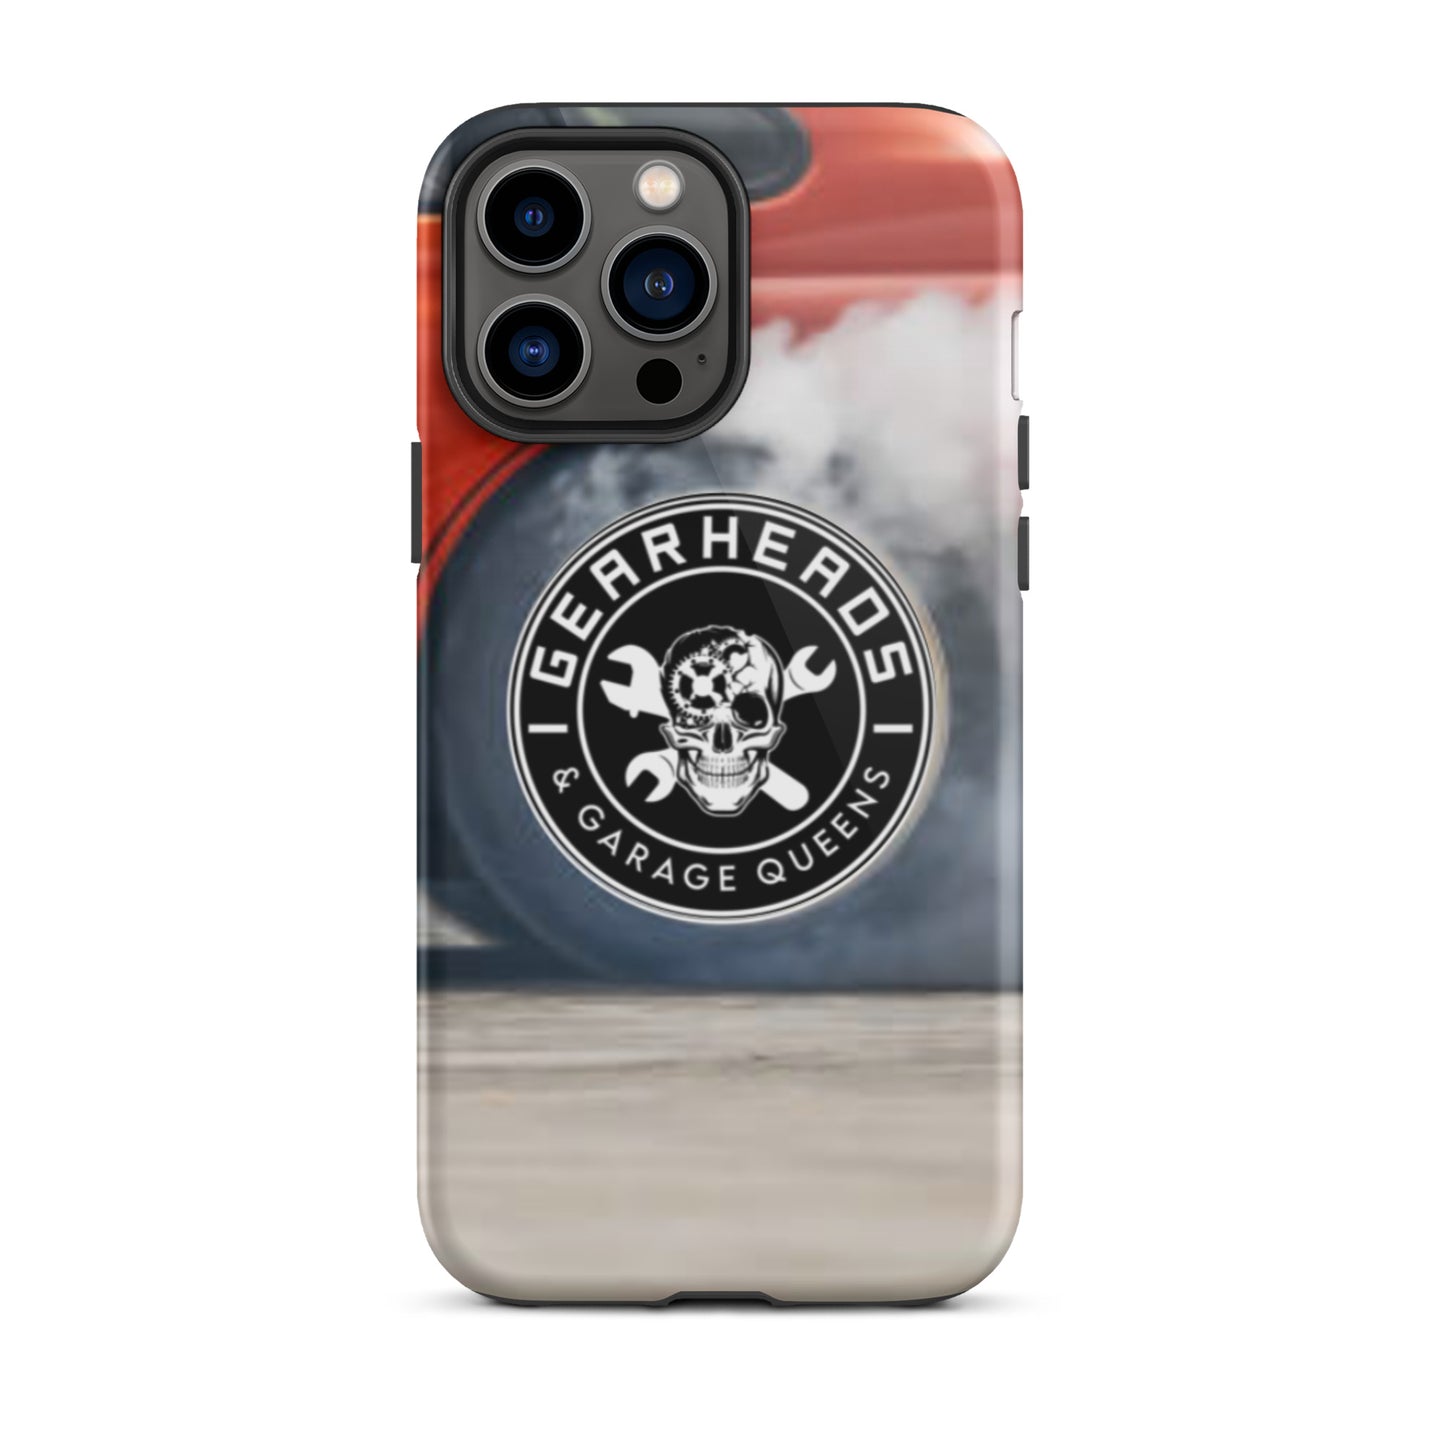 Gearheads and Garage Queens - Tough iPhone case